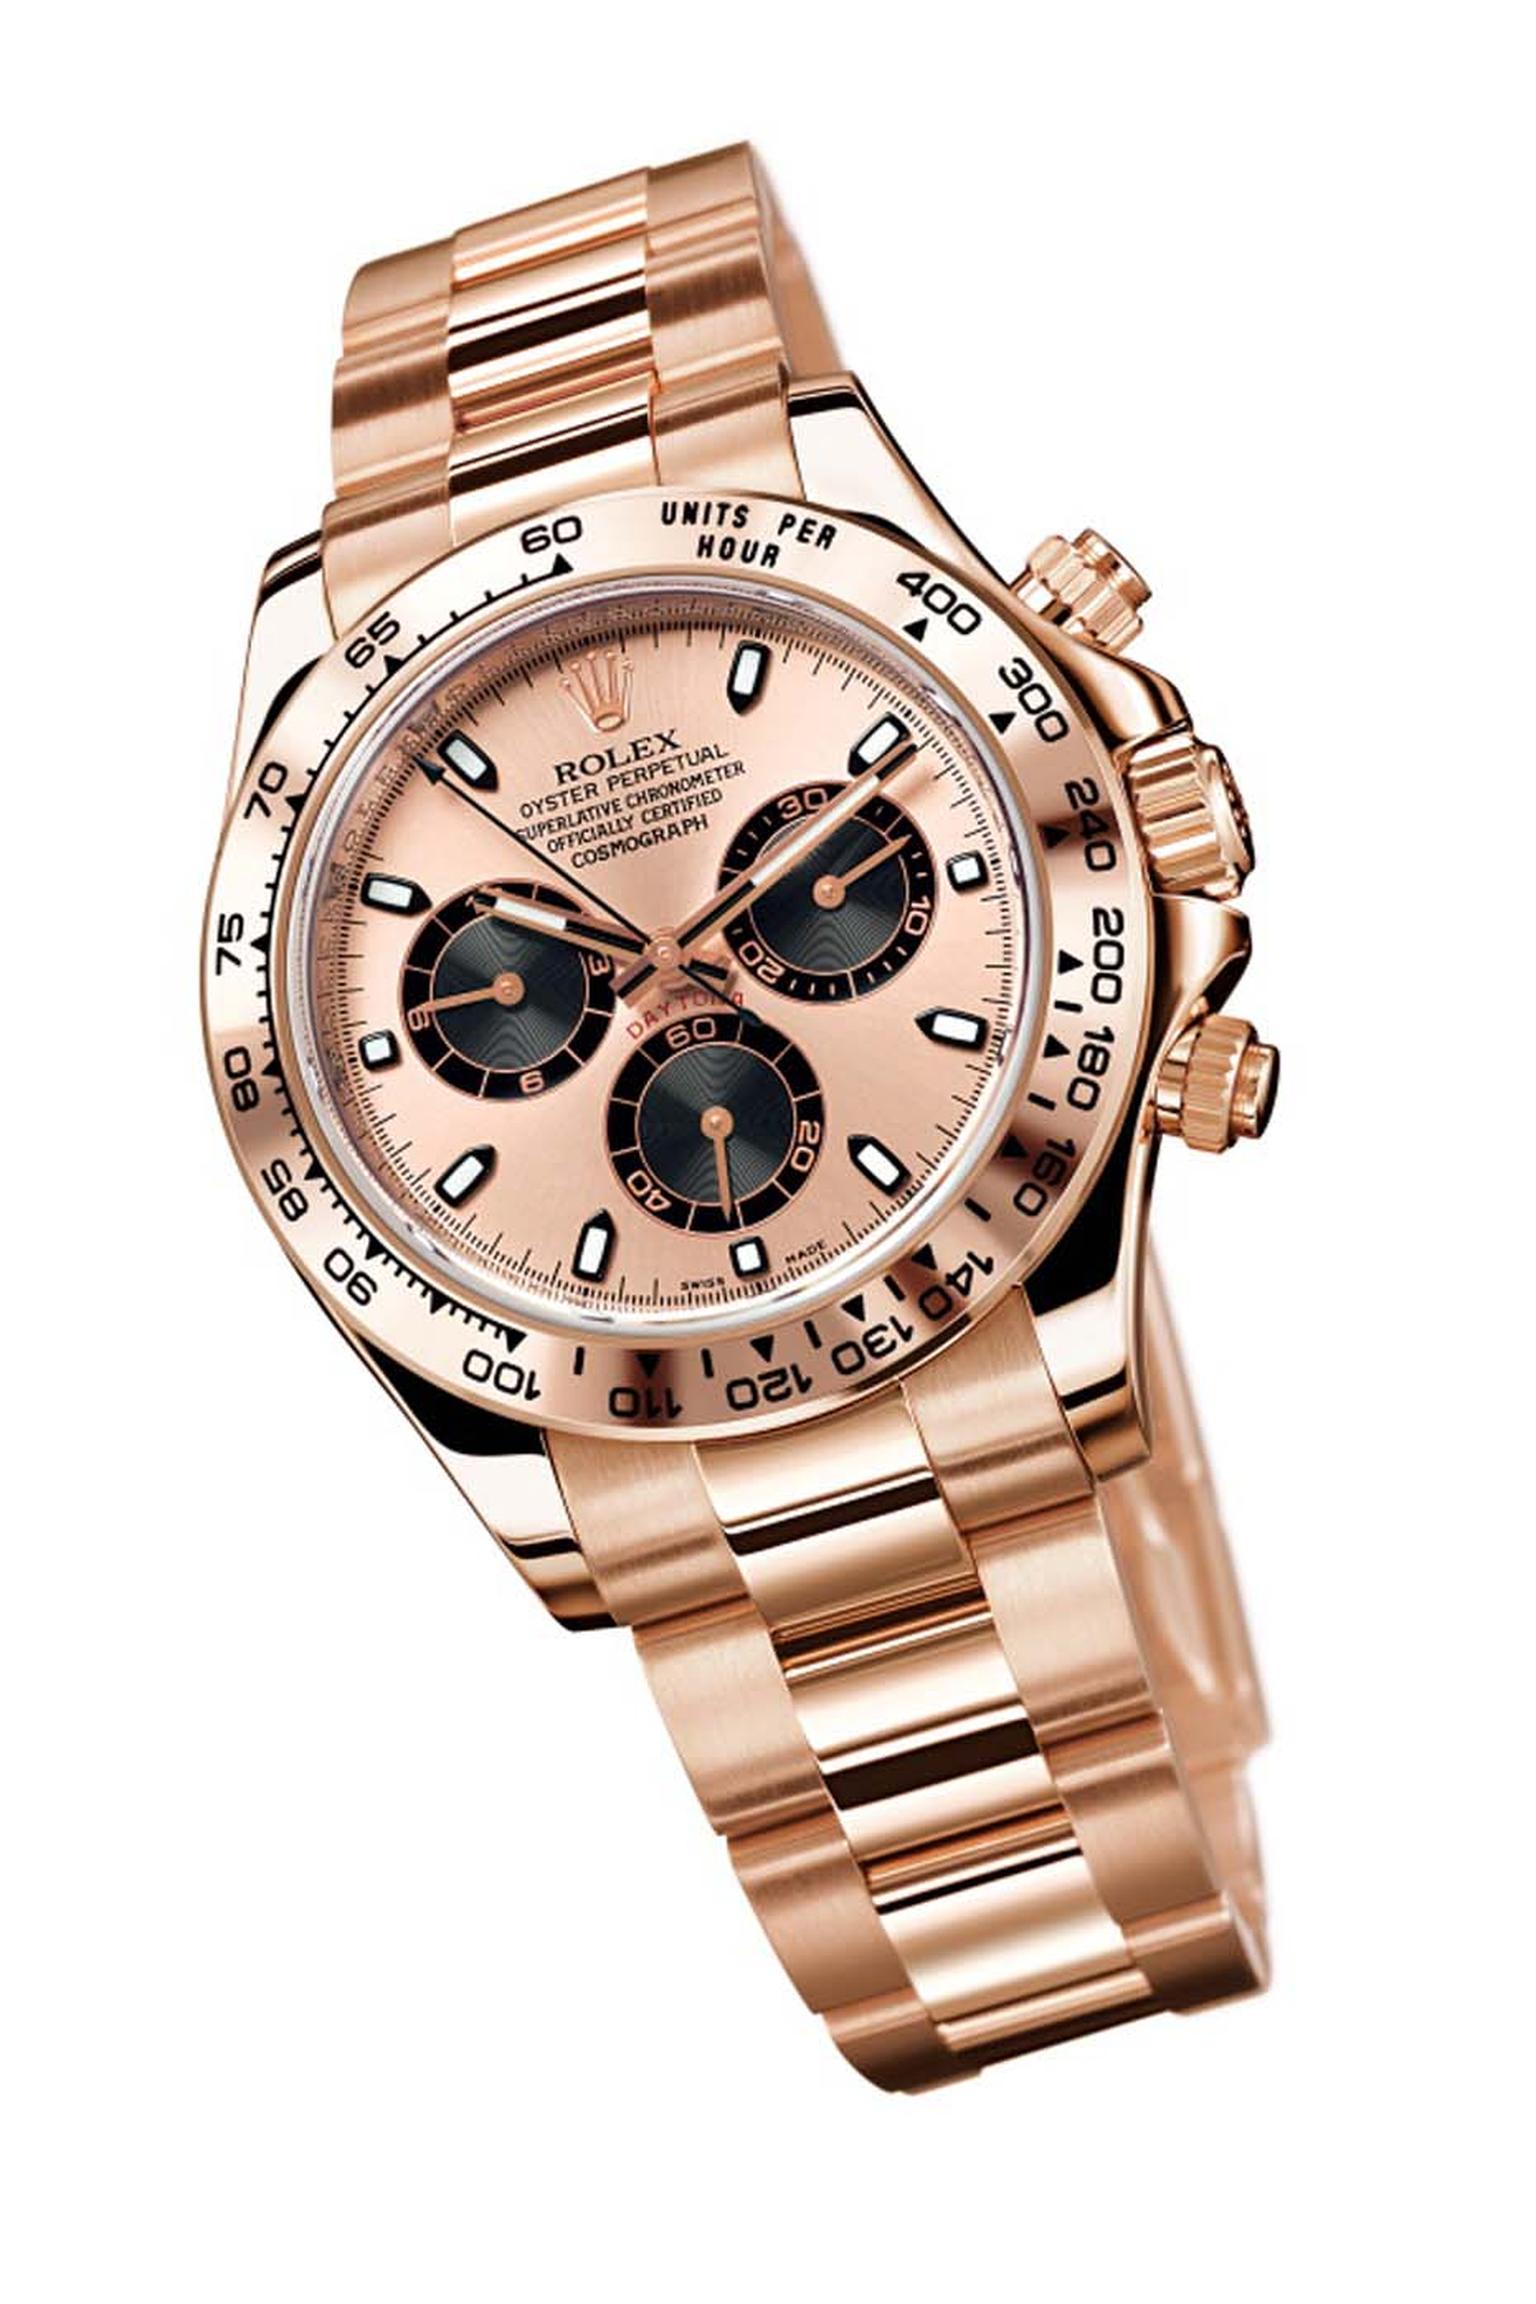 Rolex Cosmograph Daytona Everose watch with a rose gold dial and bracelet and black chronograph counters.